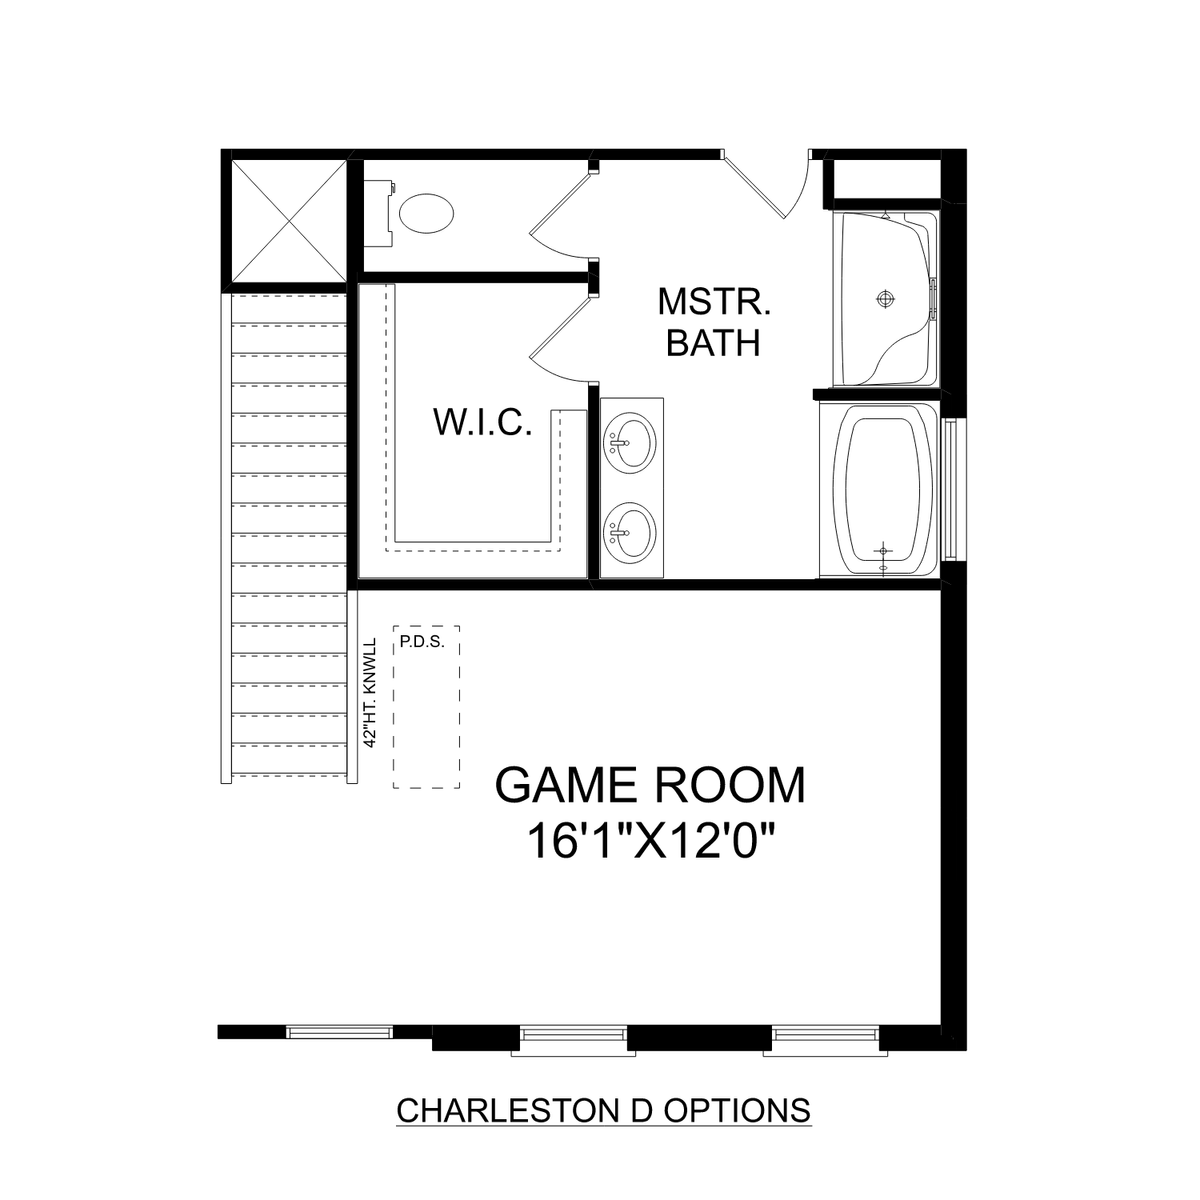 3 - The Charleston D buildable floor plan layout in Davidson Homes' Wood Trail community.